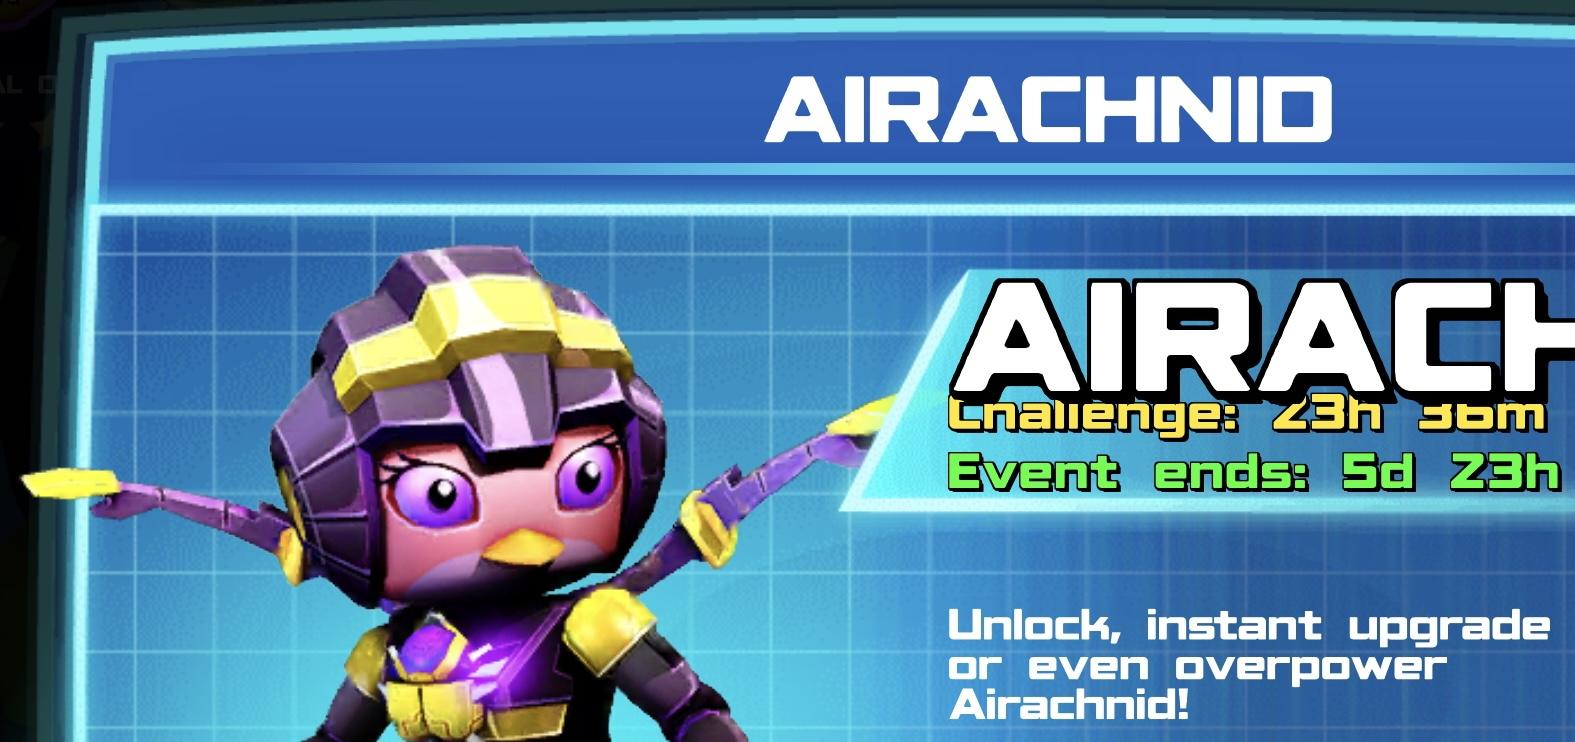 The event banner for Airachnid